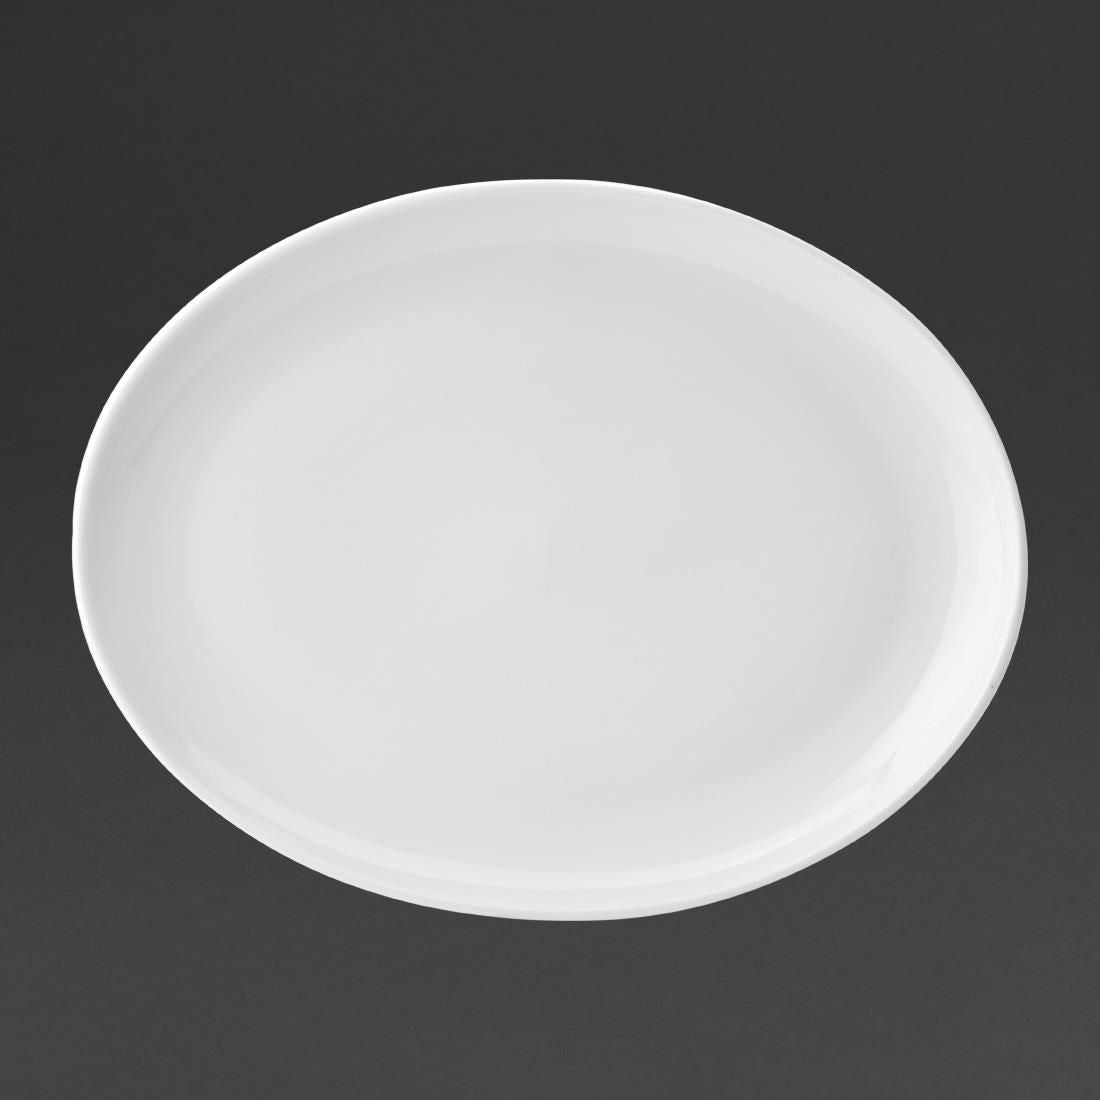 DY322 Utopia Pure White Oval Plates 360mm (Pack of 18)